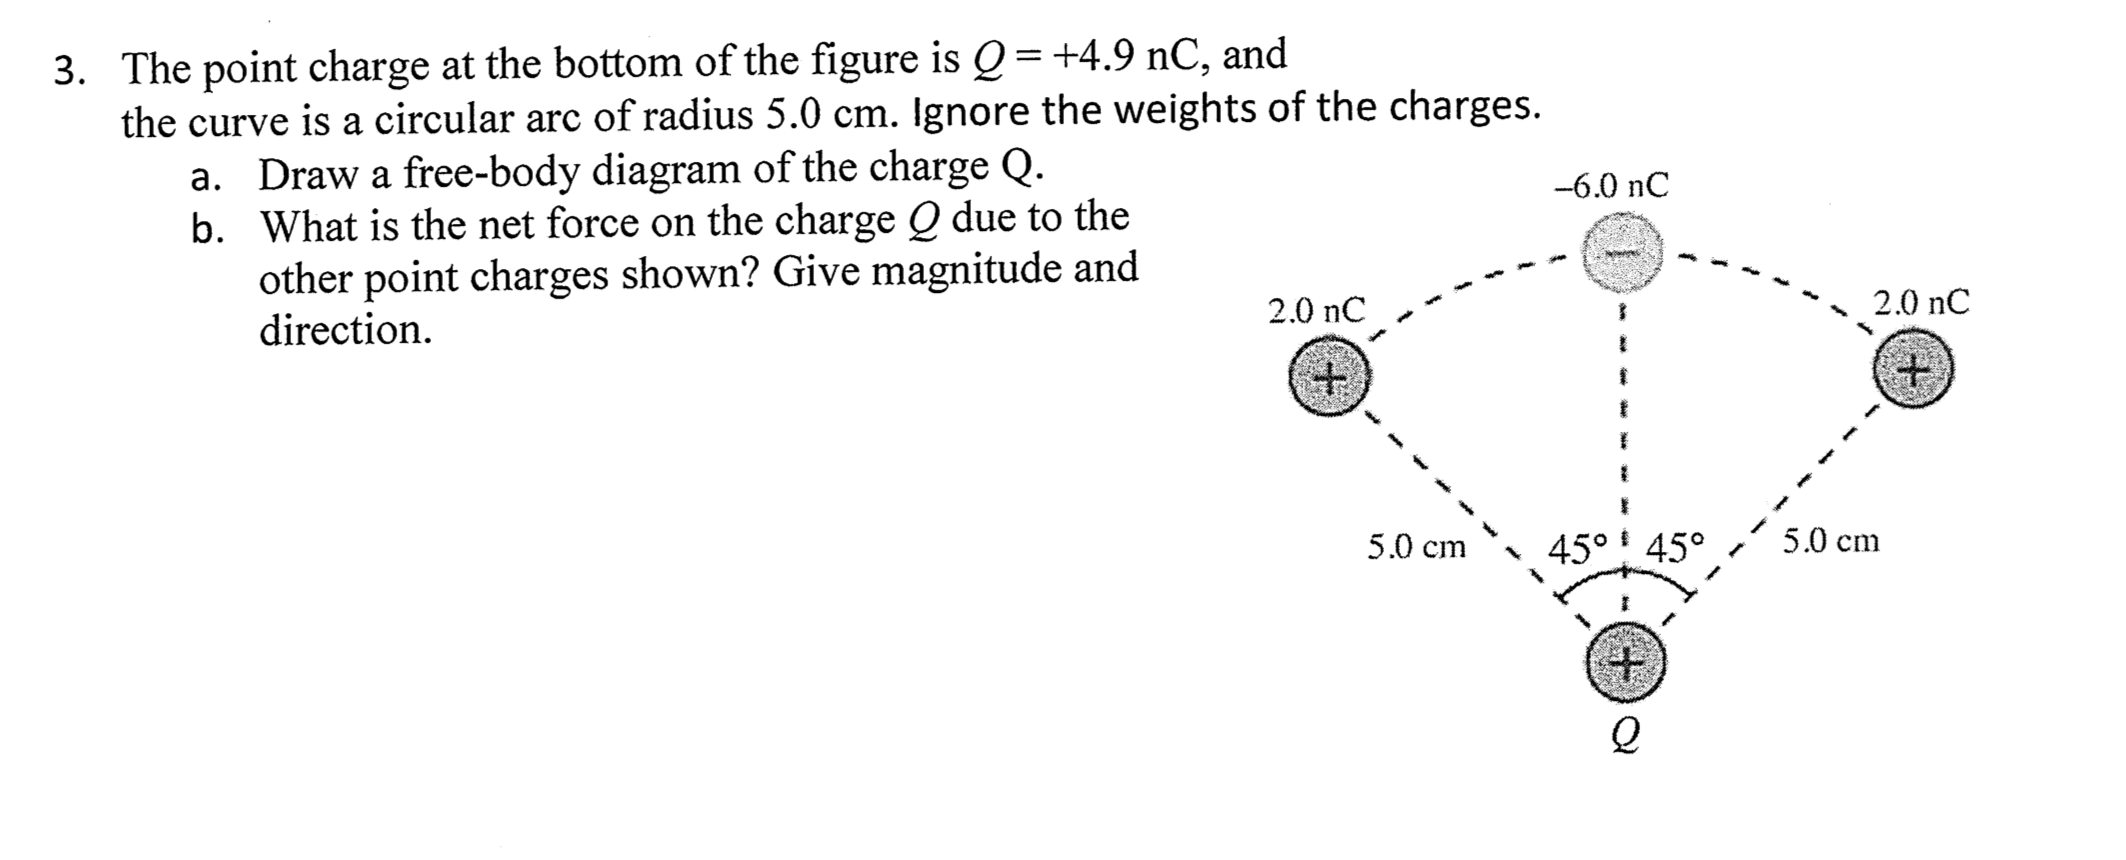 3. The point charge at the bottom of the figure is Q= +4.9 nC, and
the curve is a circular arc of radius 5.0 cm. Ignore the weights of the charges.
a. Draw a free-body diagram of the charge Q.
b. What is the net force on the charge O due to the
other point charges shown? Give magnitude and
direction.
--6.0 nC
2.0 nC
2.0 nC
5.0 cm
45° 45°
5.0 cm
